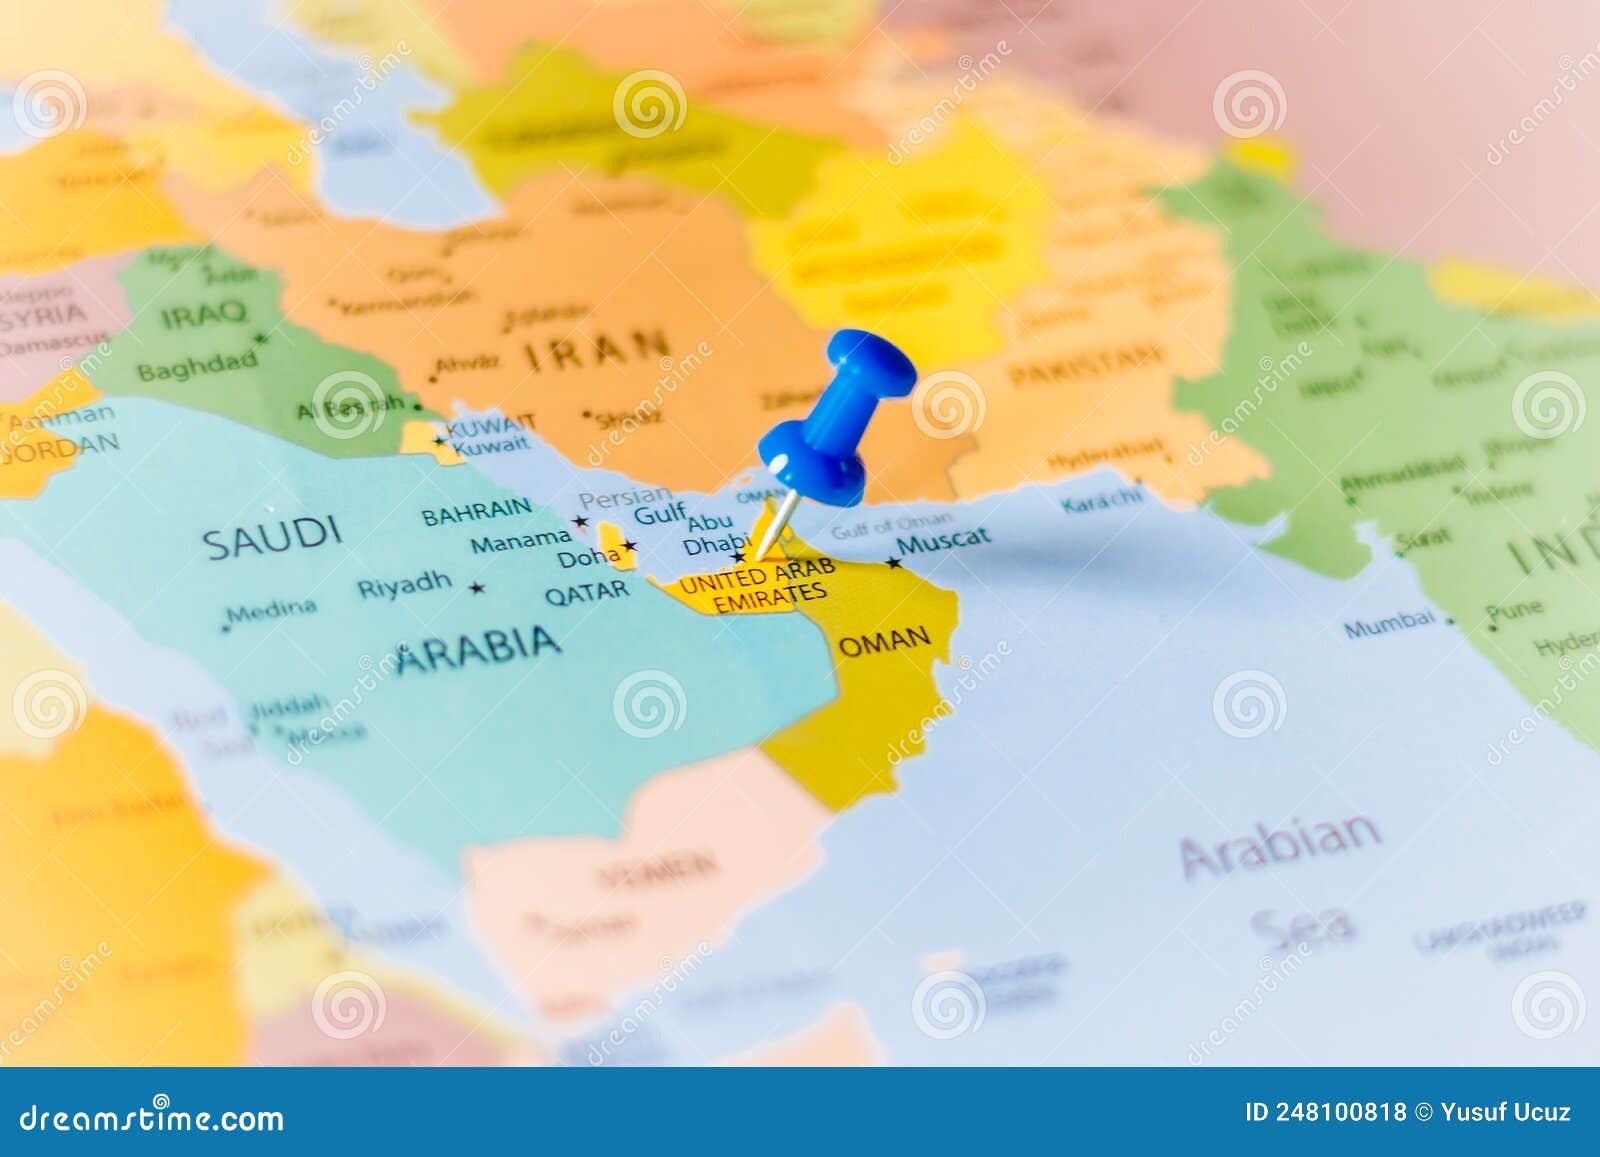 blue push pin pointing at united arab emirates on a political world map